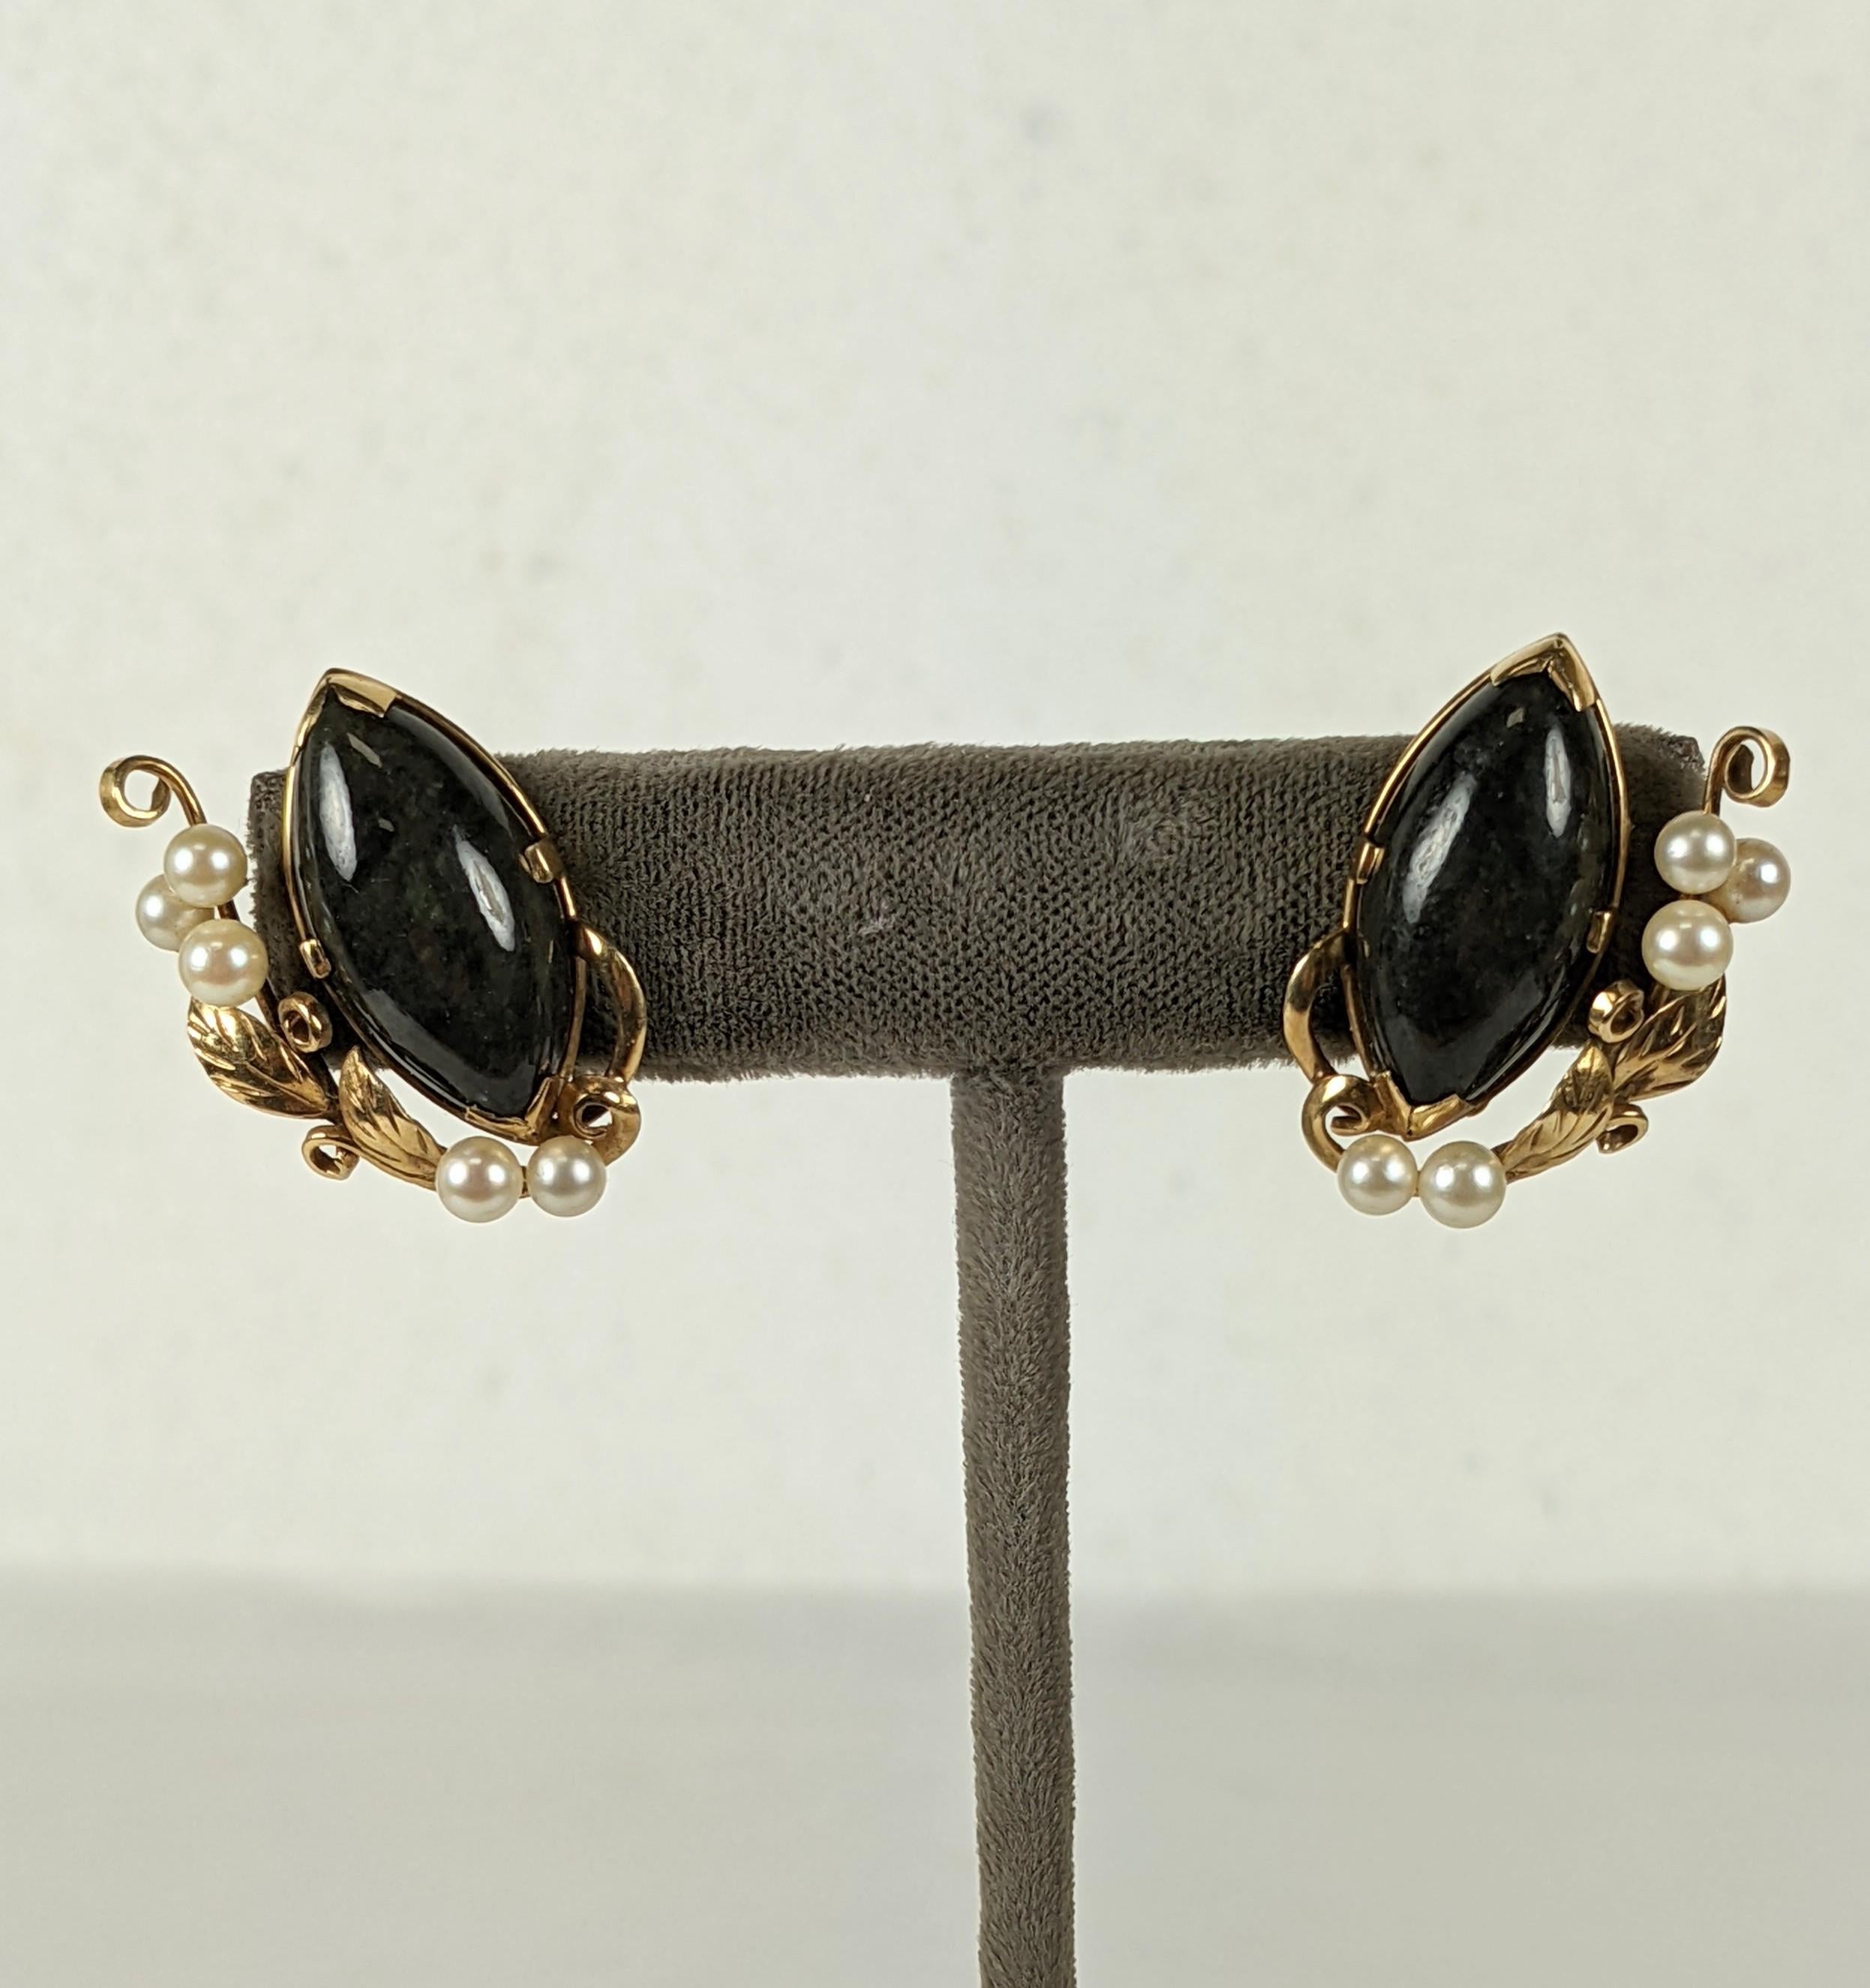 Ming's Black Jade and Cultured Pearl Leaf Earrings set in 14k gold. Marquise black jade stones set with a branch of gold leaves and pearls trailing up the ear. 1